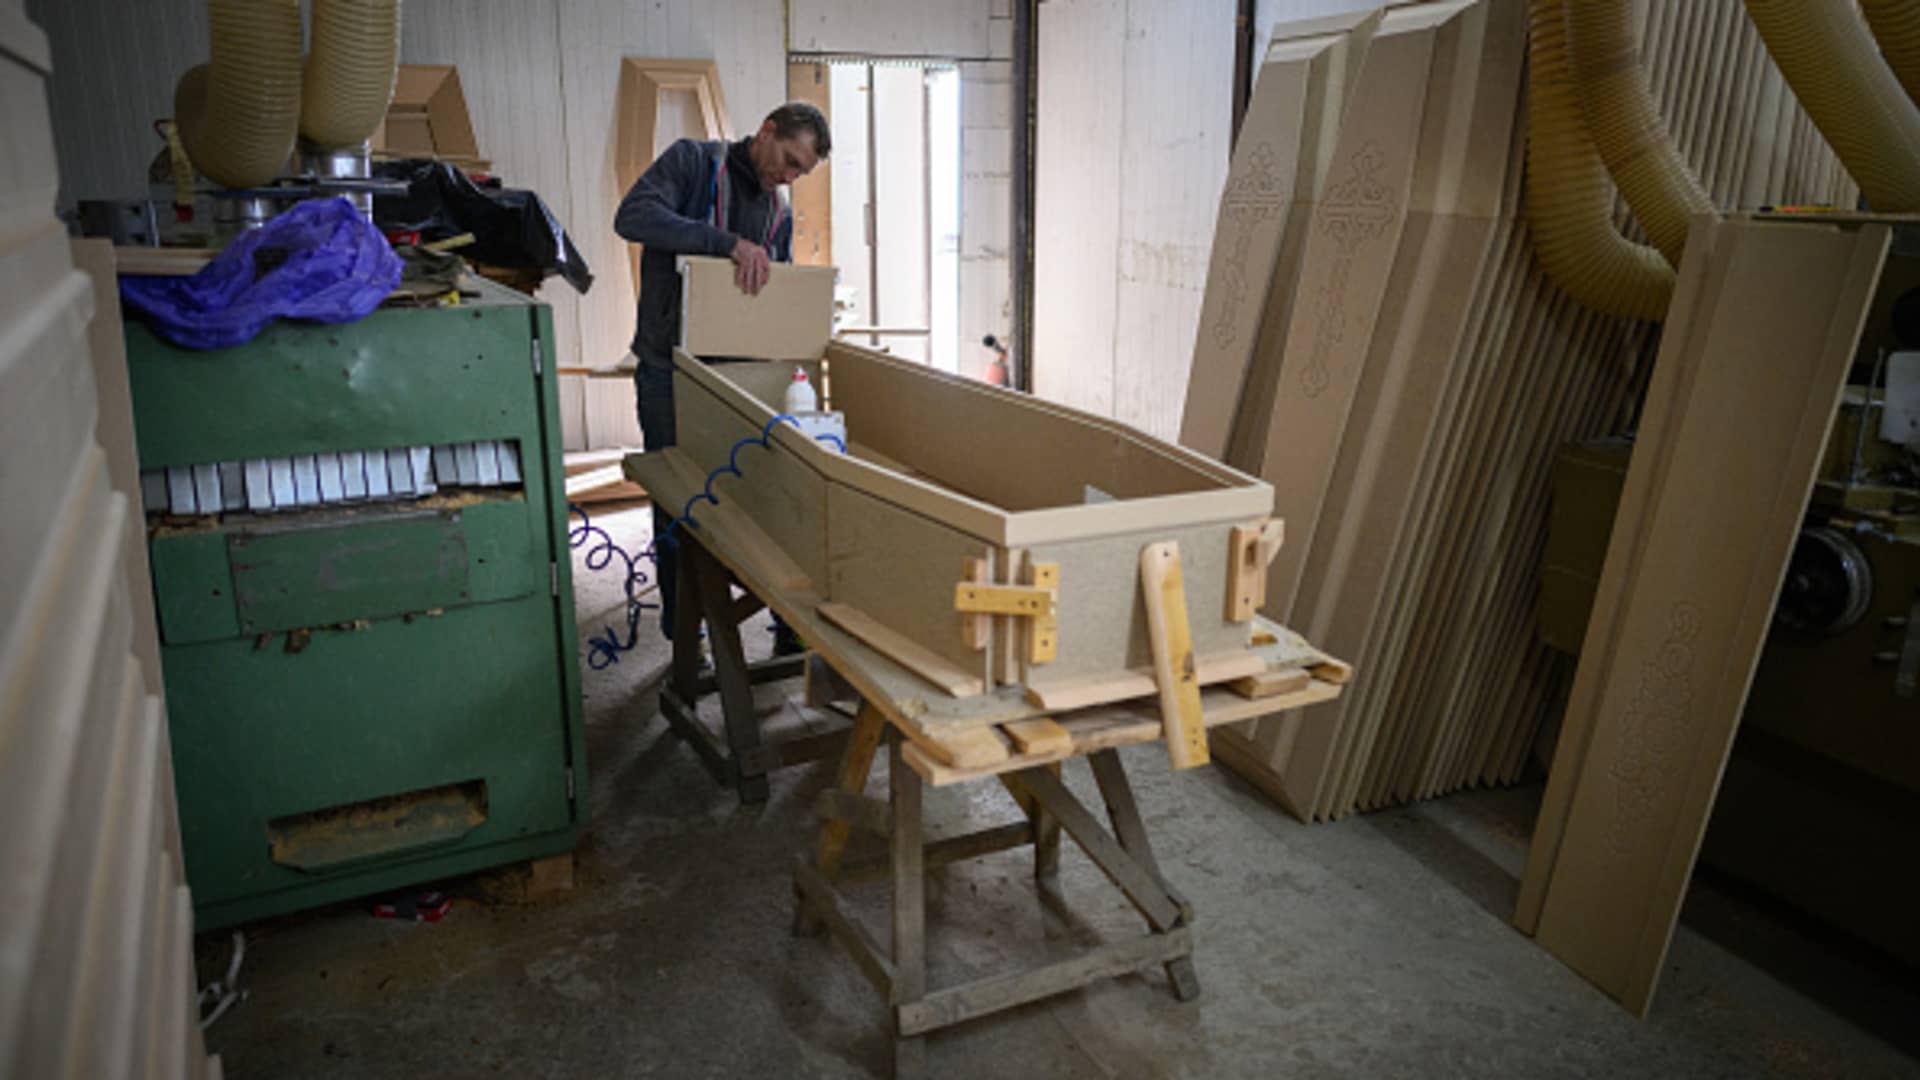 Craftsman Ruslan Petryshyn constructs the framework of a new coffin at a coffin workshop on April 28, 2022 in Rava-Ruska, Ukraine.